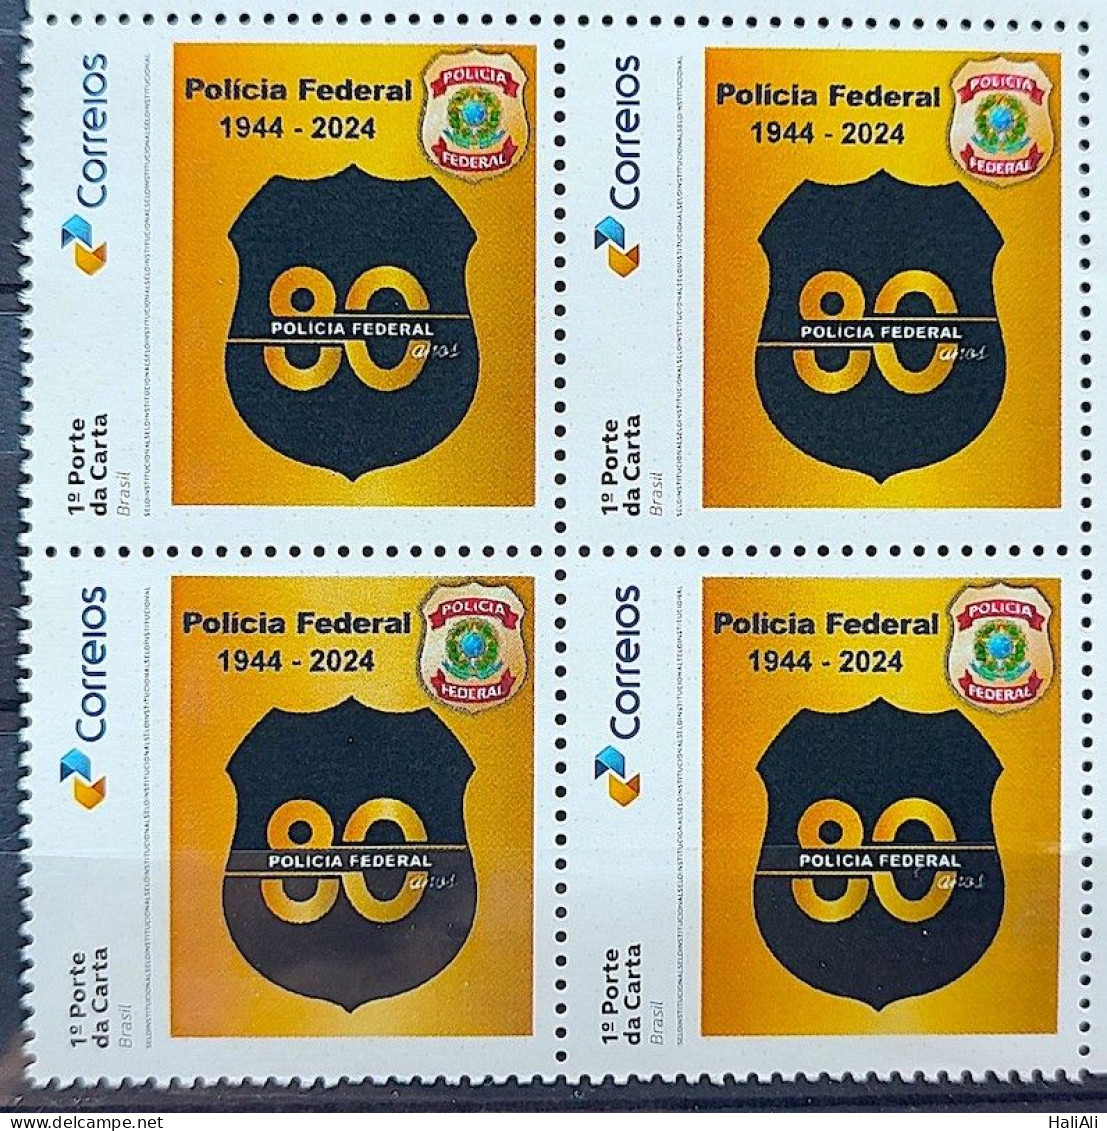 SI 21 Brazil Institutional Stamp 80 Years Federal Military Police 2024 Block Of 4 - Sellos Personalizados